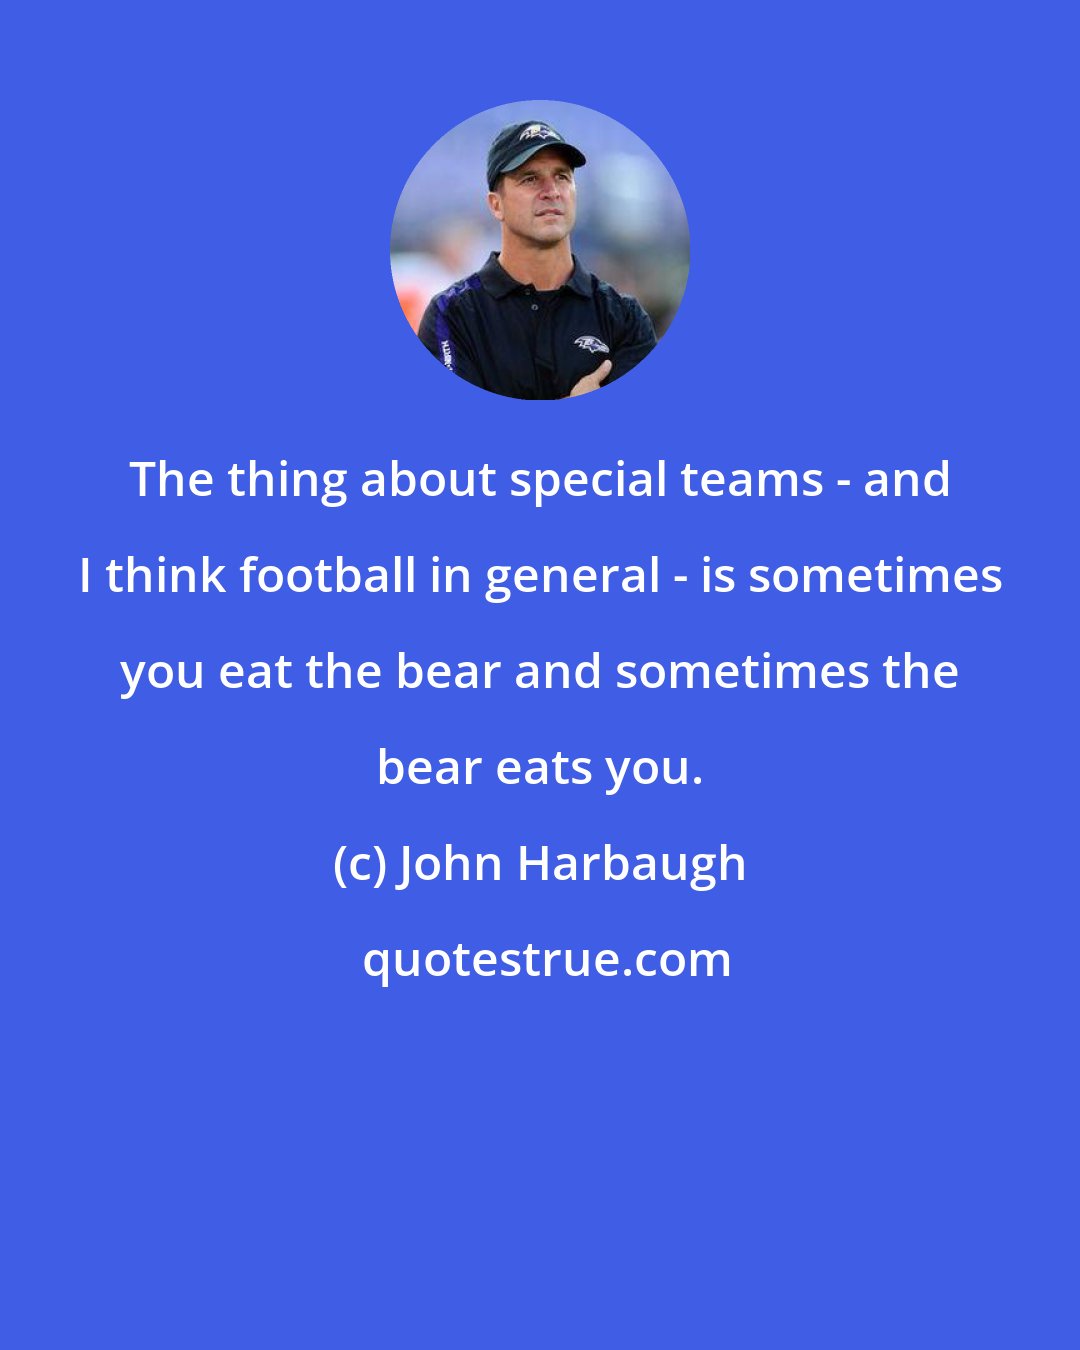 John Harbaugh: The thing about special teams - and I think football in general - is sometimes you eat the bear and sometimes the bear eats you.